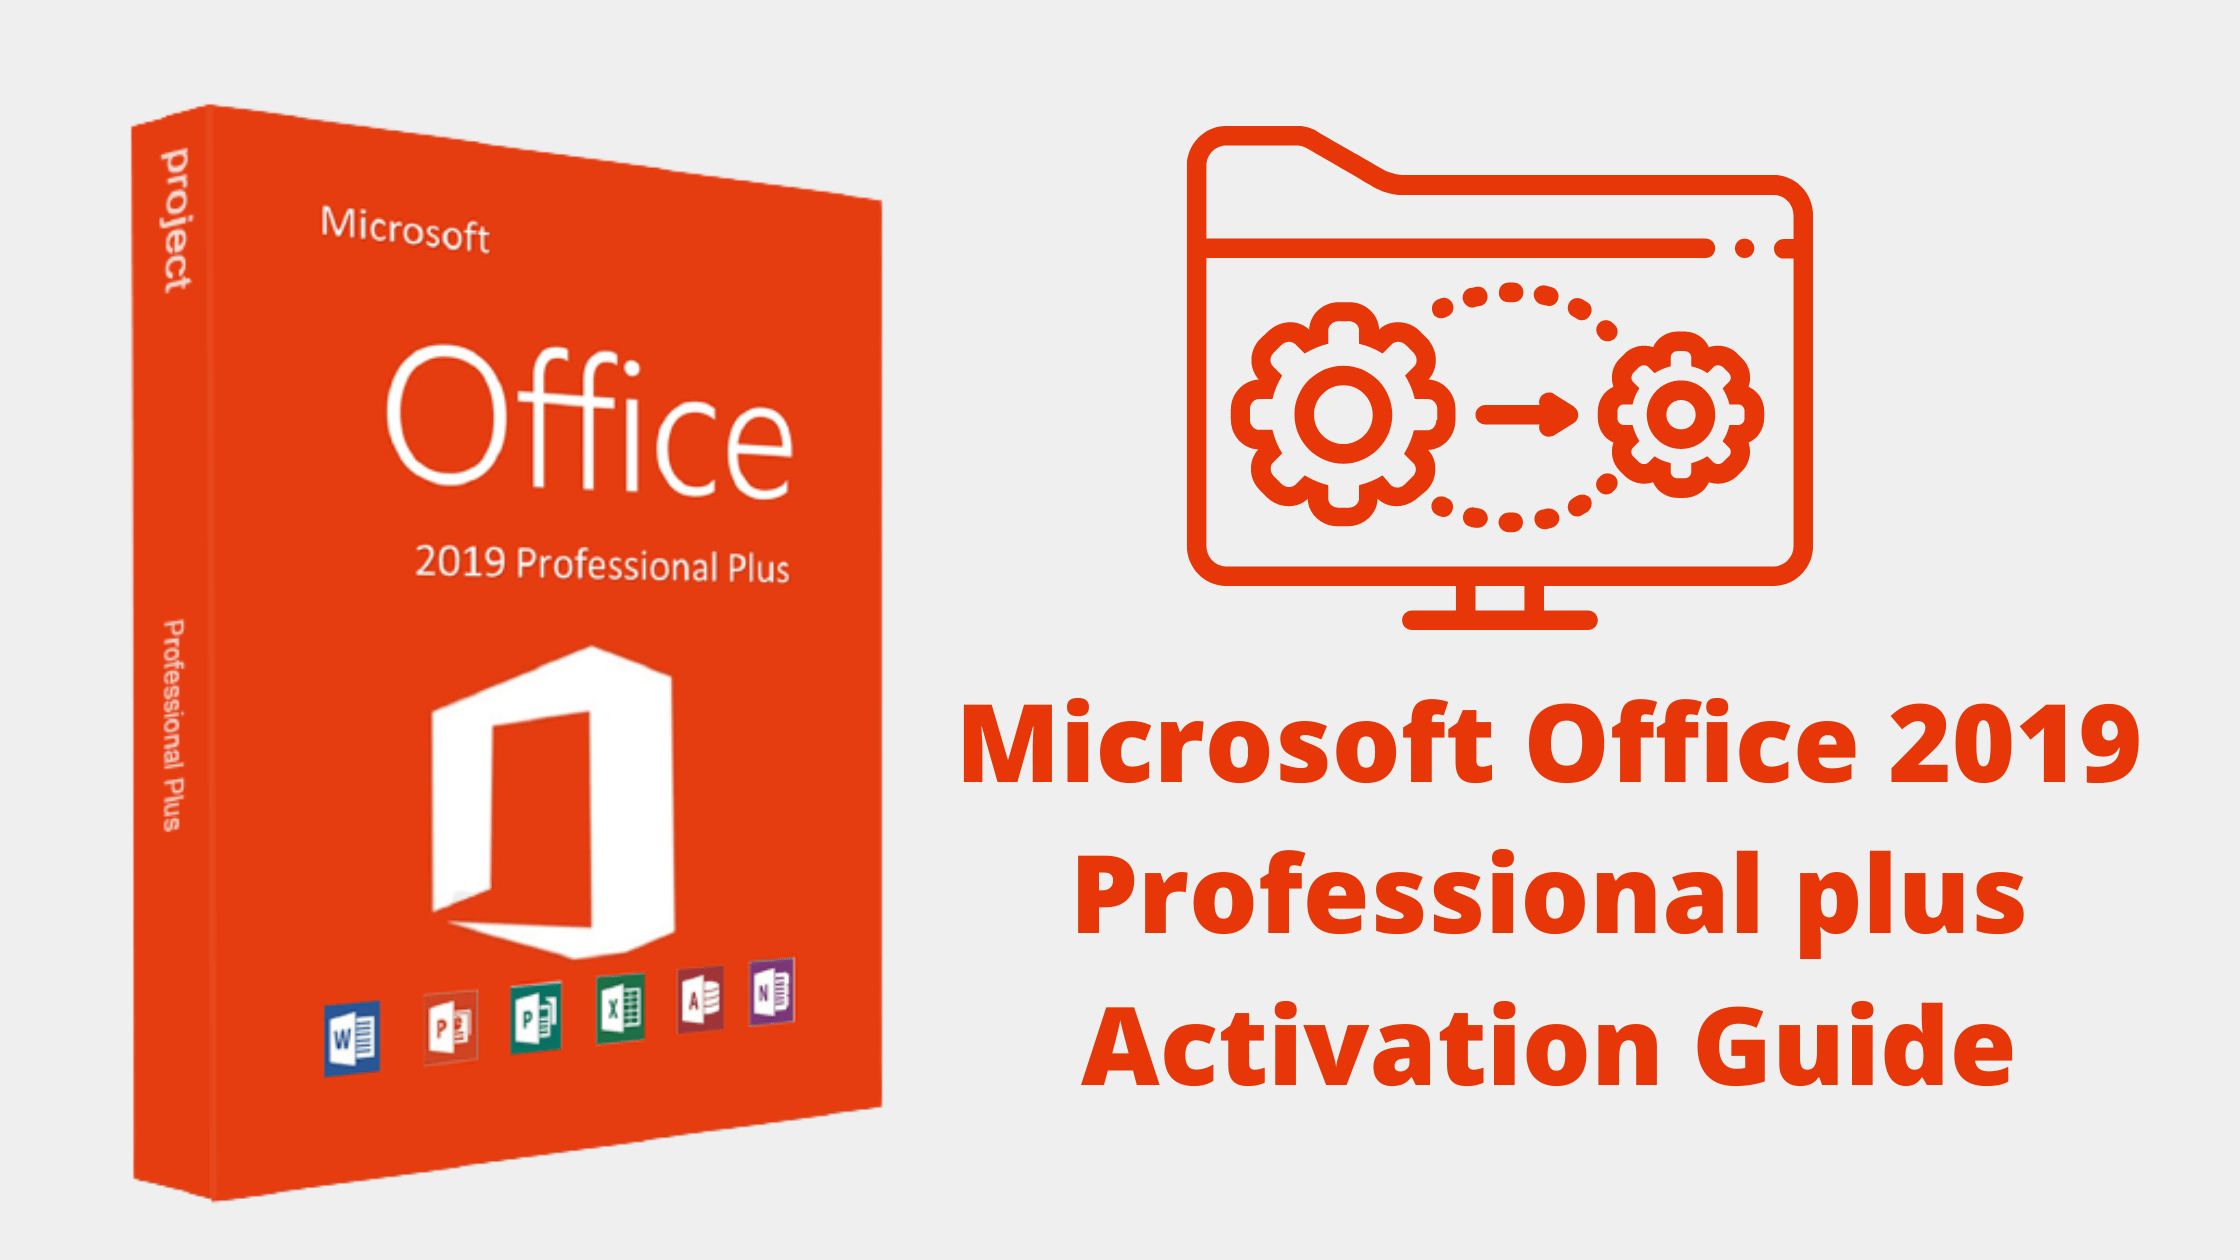 Microsoft Office 2019 Professional plus Activation Guide